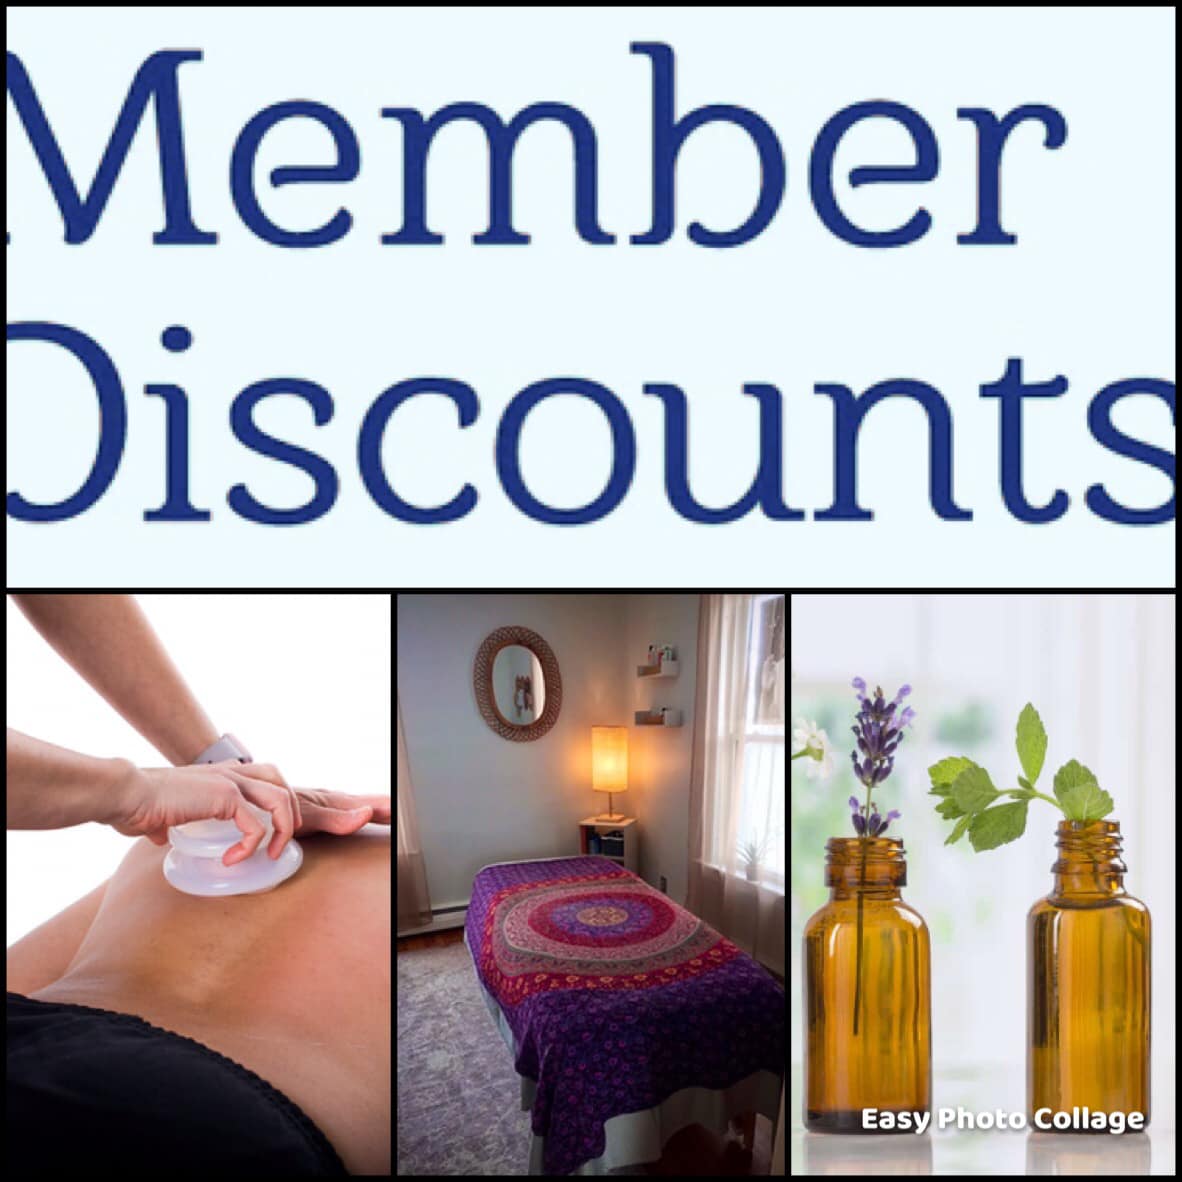 Members discount for massage